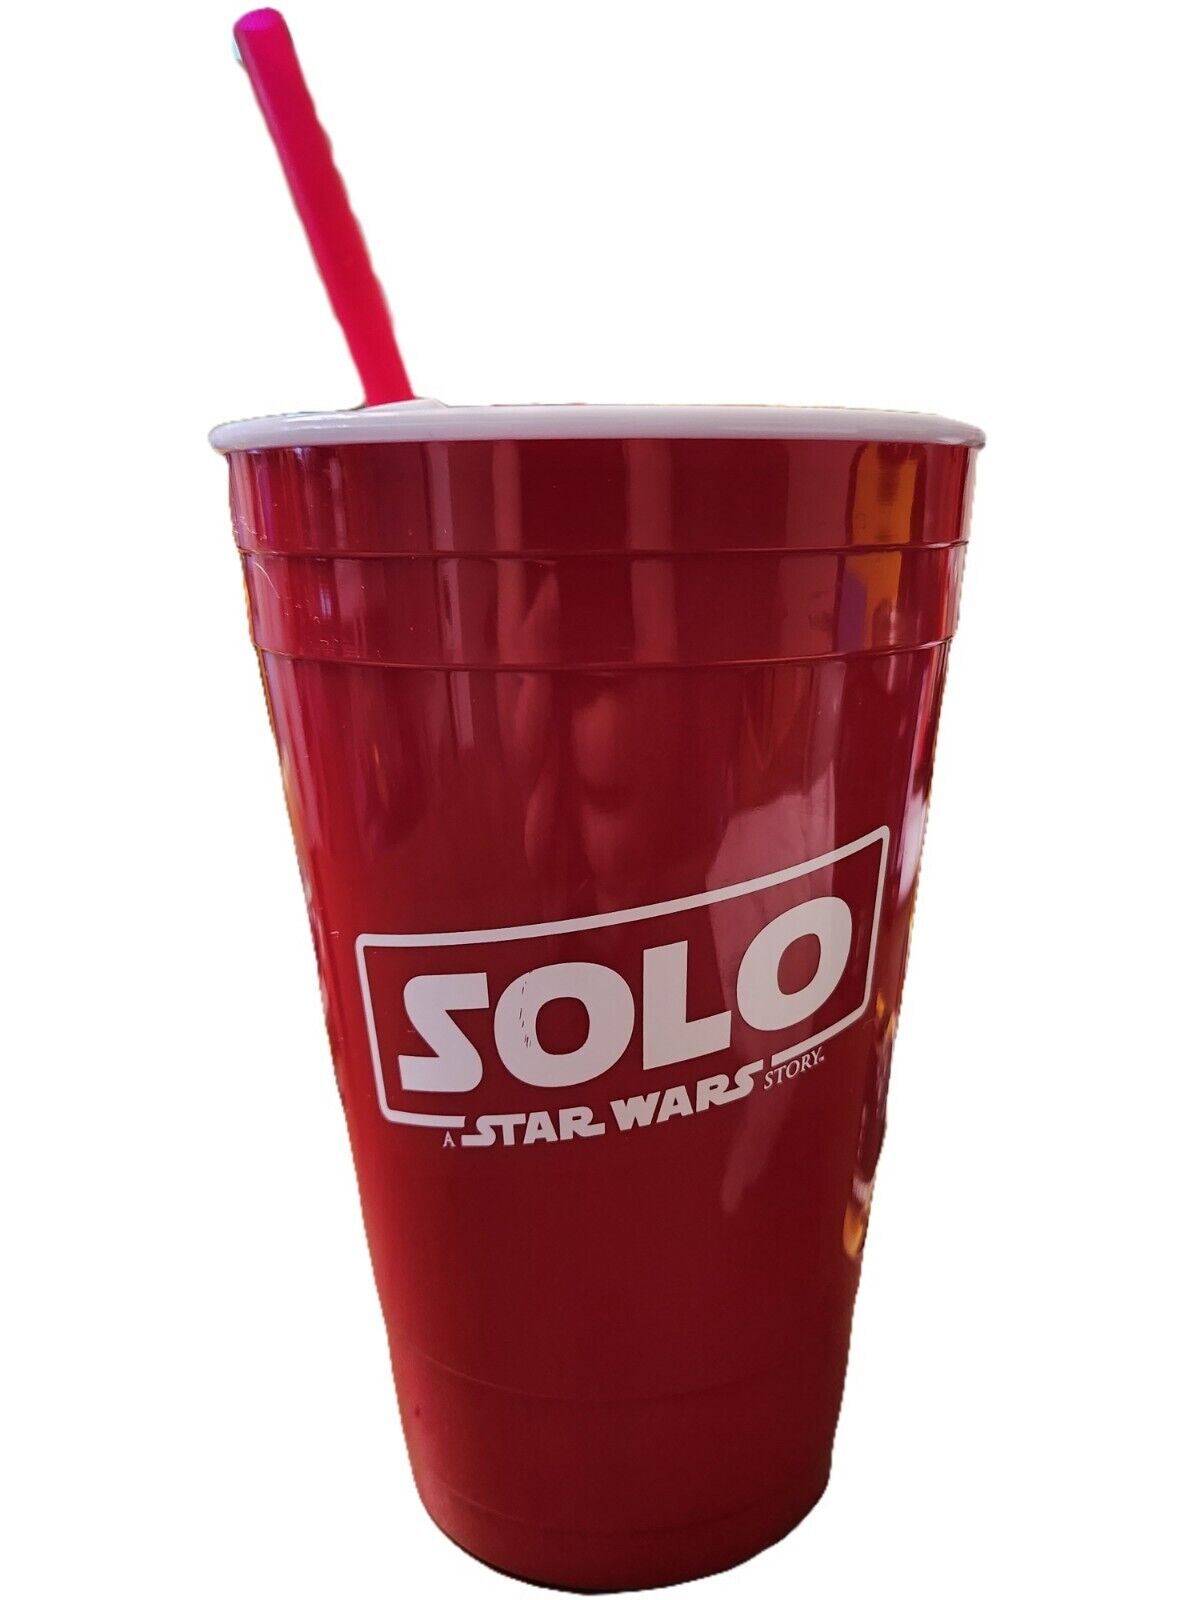 Solo A Star Wars Story Red Cup Lucasfilm Exclusive